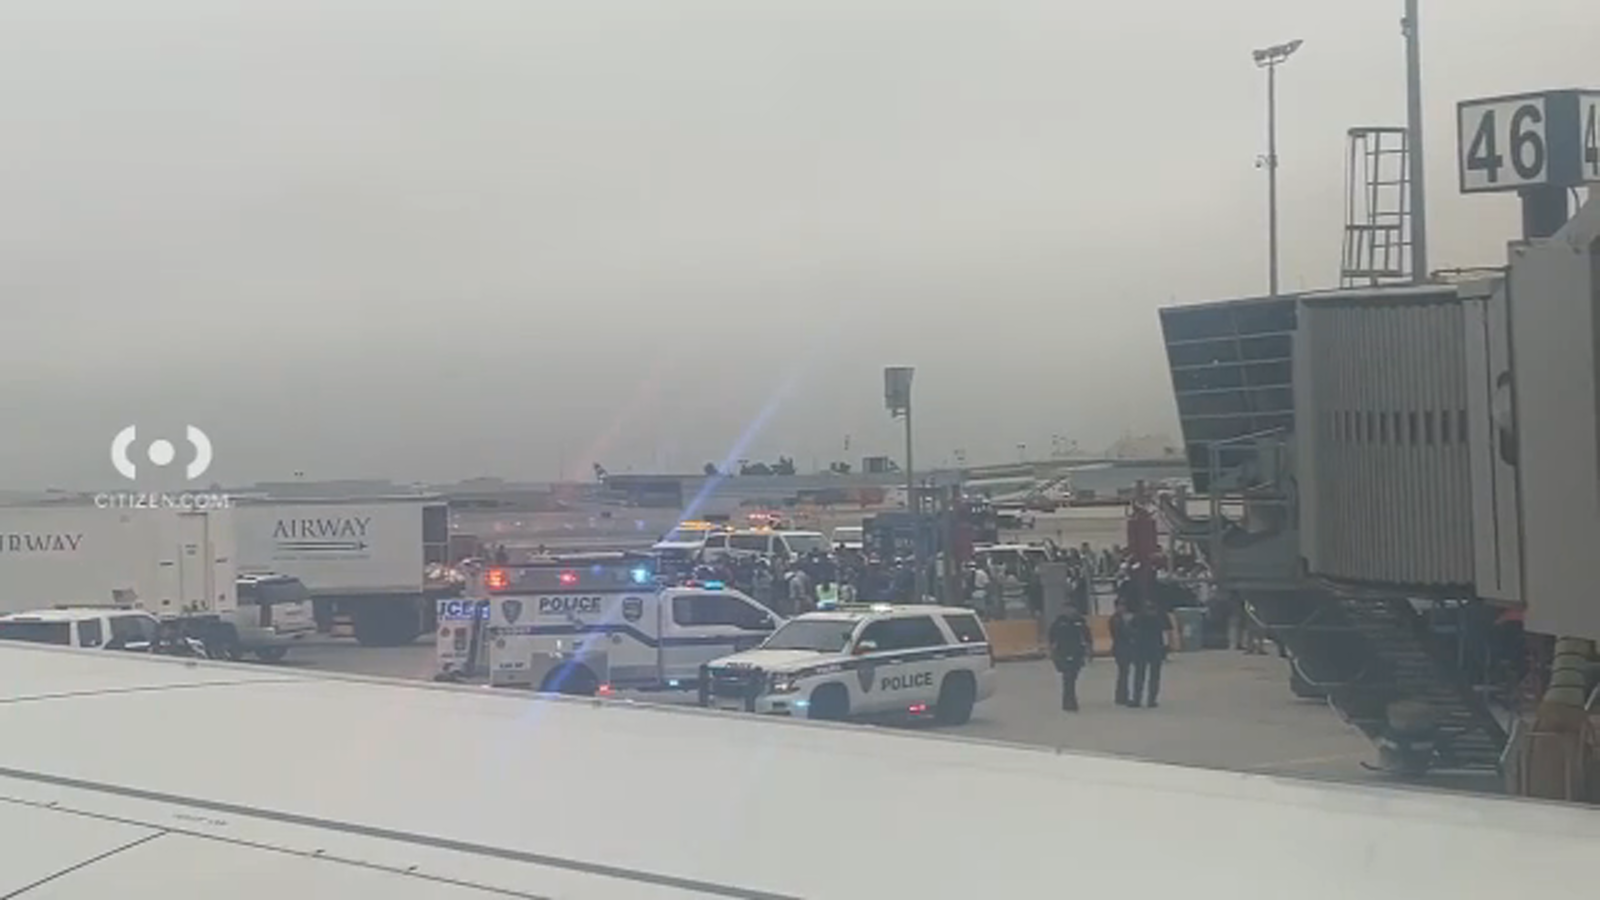 JFK airport fire: 9 injured, American Airlines flights canceled and delayed in Queens, NYC [Video]